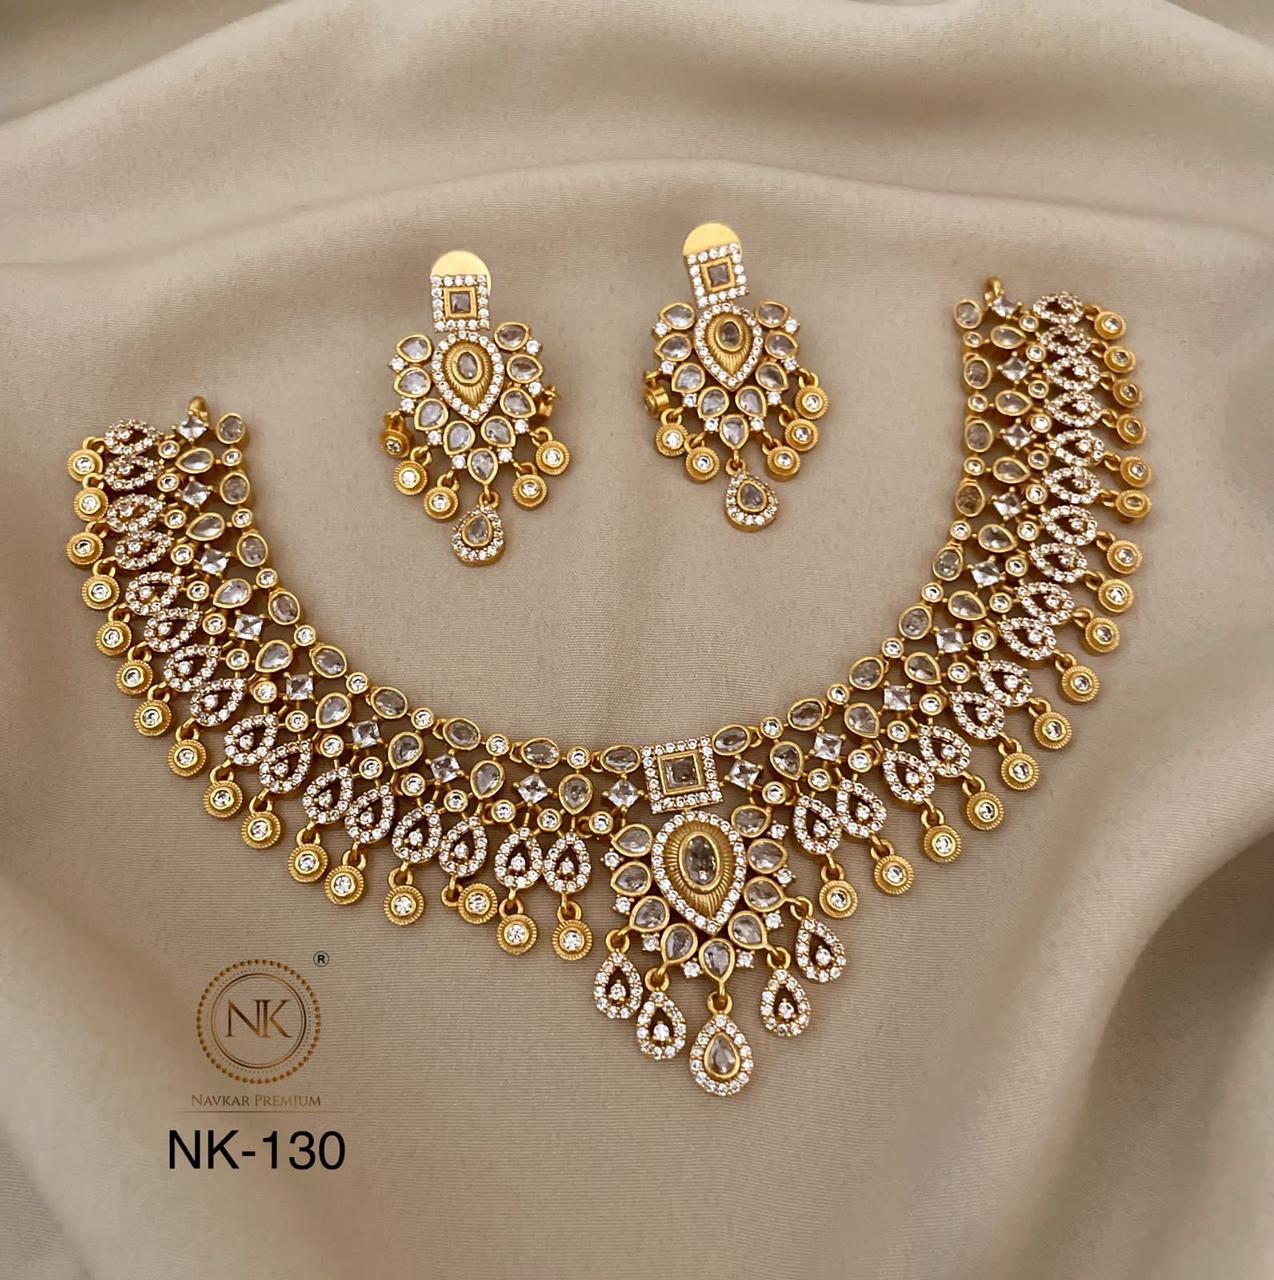 Trendy Design in American Diamond stone Matte Finish Jewelry- Necklace Set with Earrings